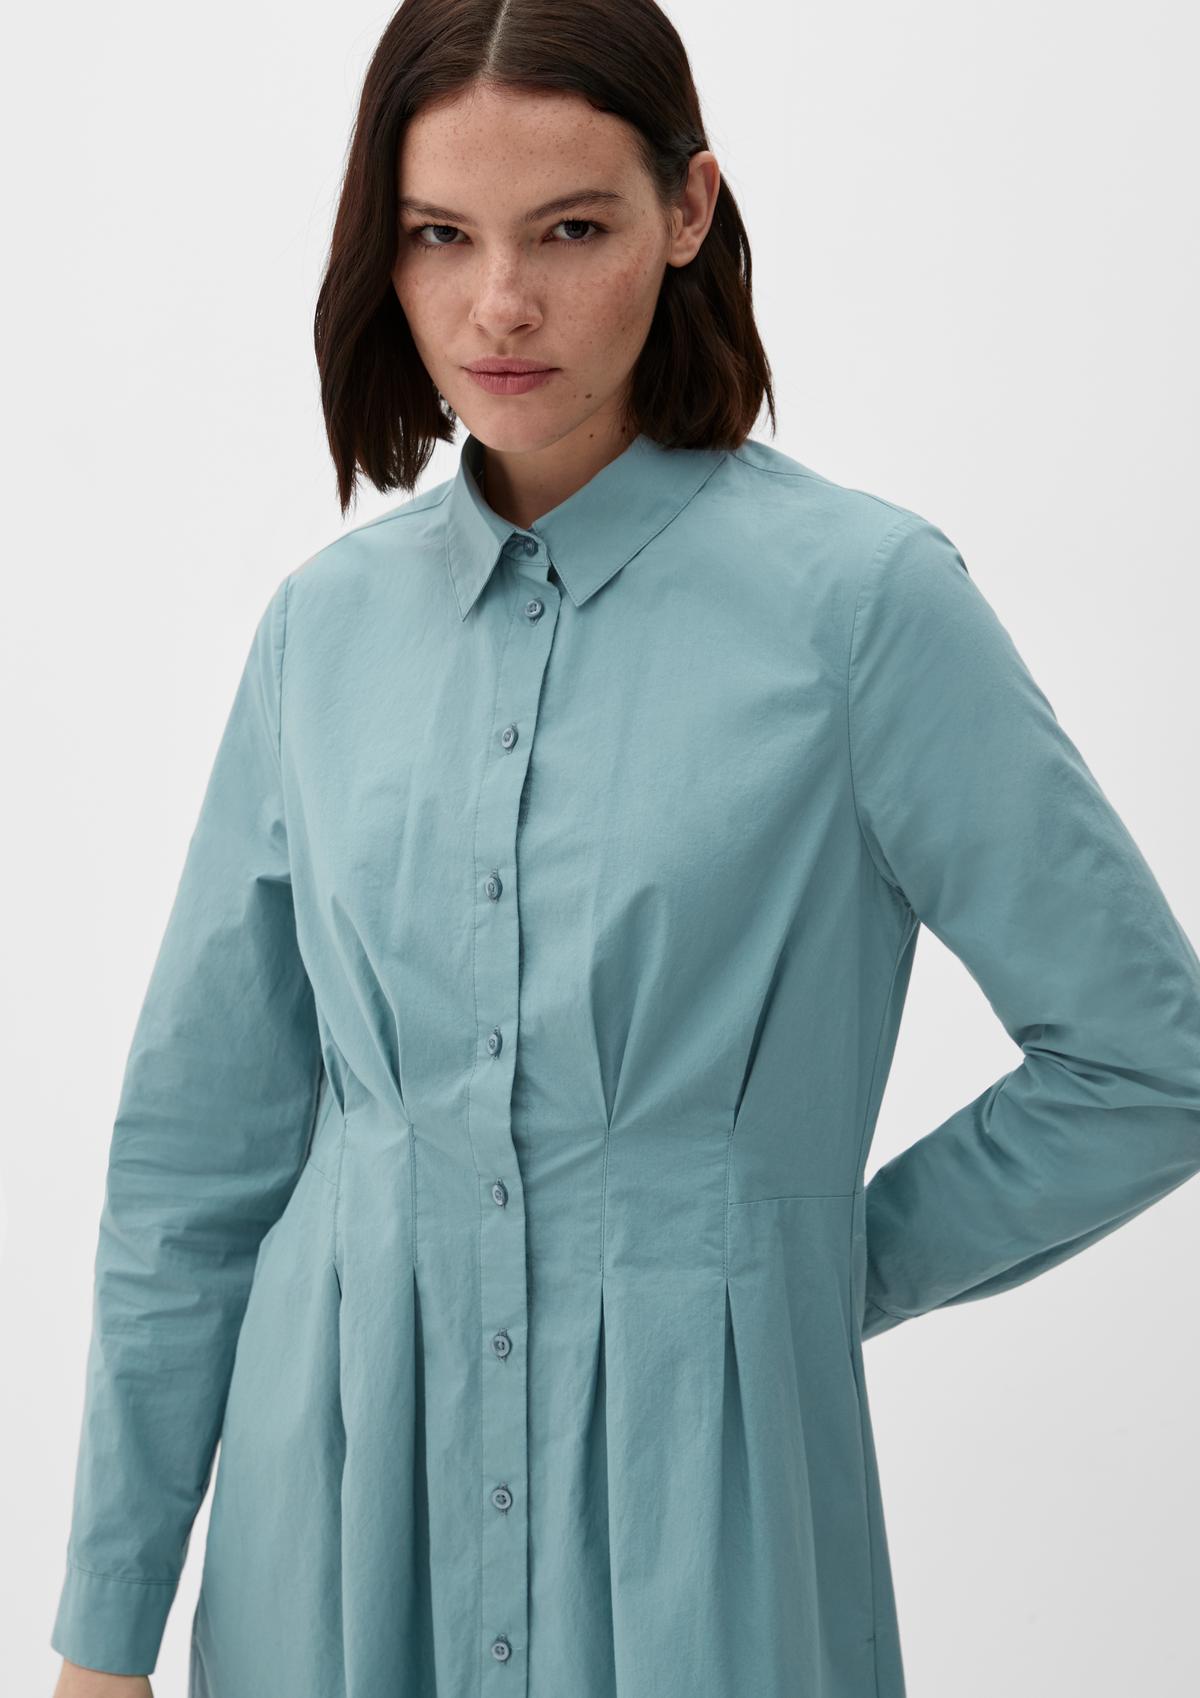 s.Oliver Blouse dress with inverted pleats